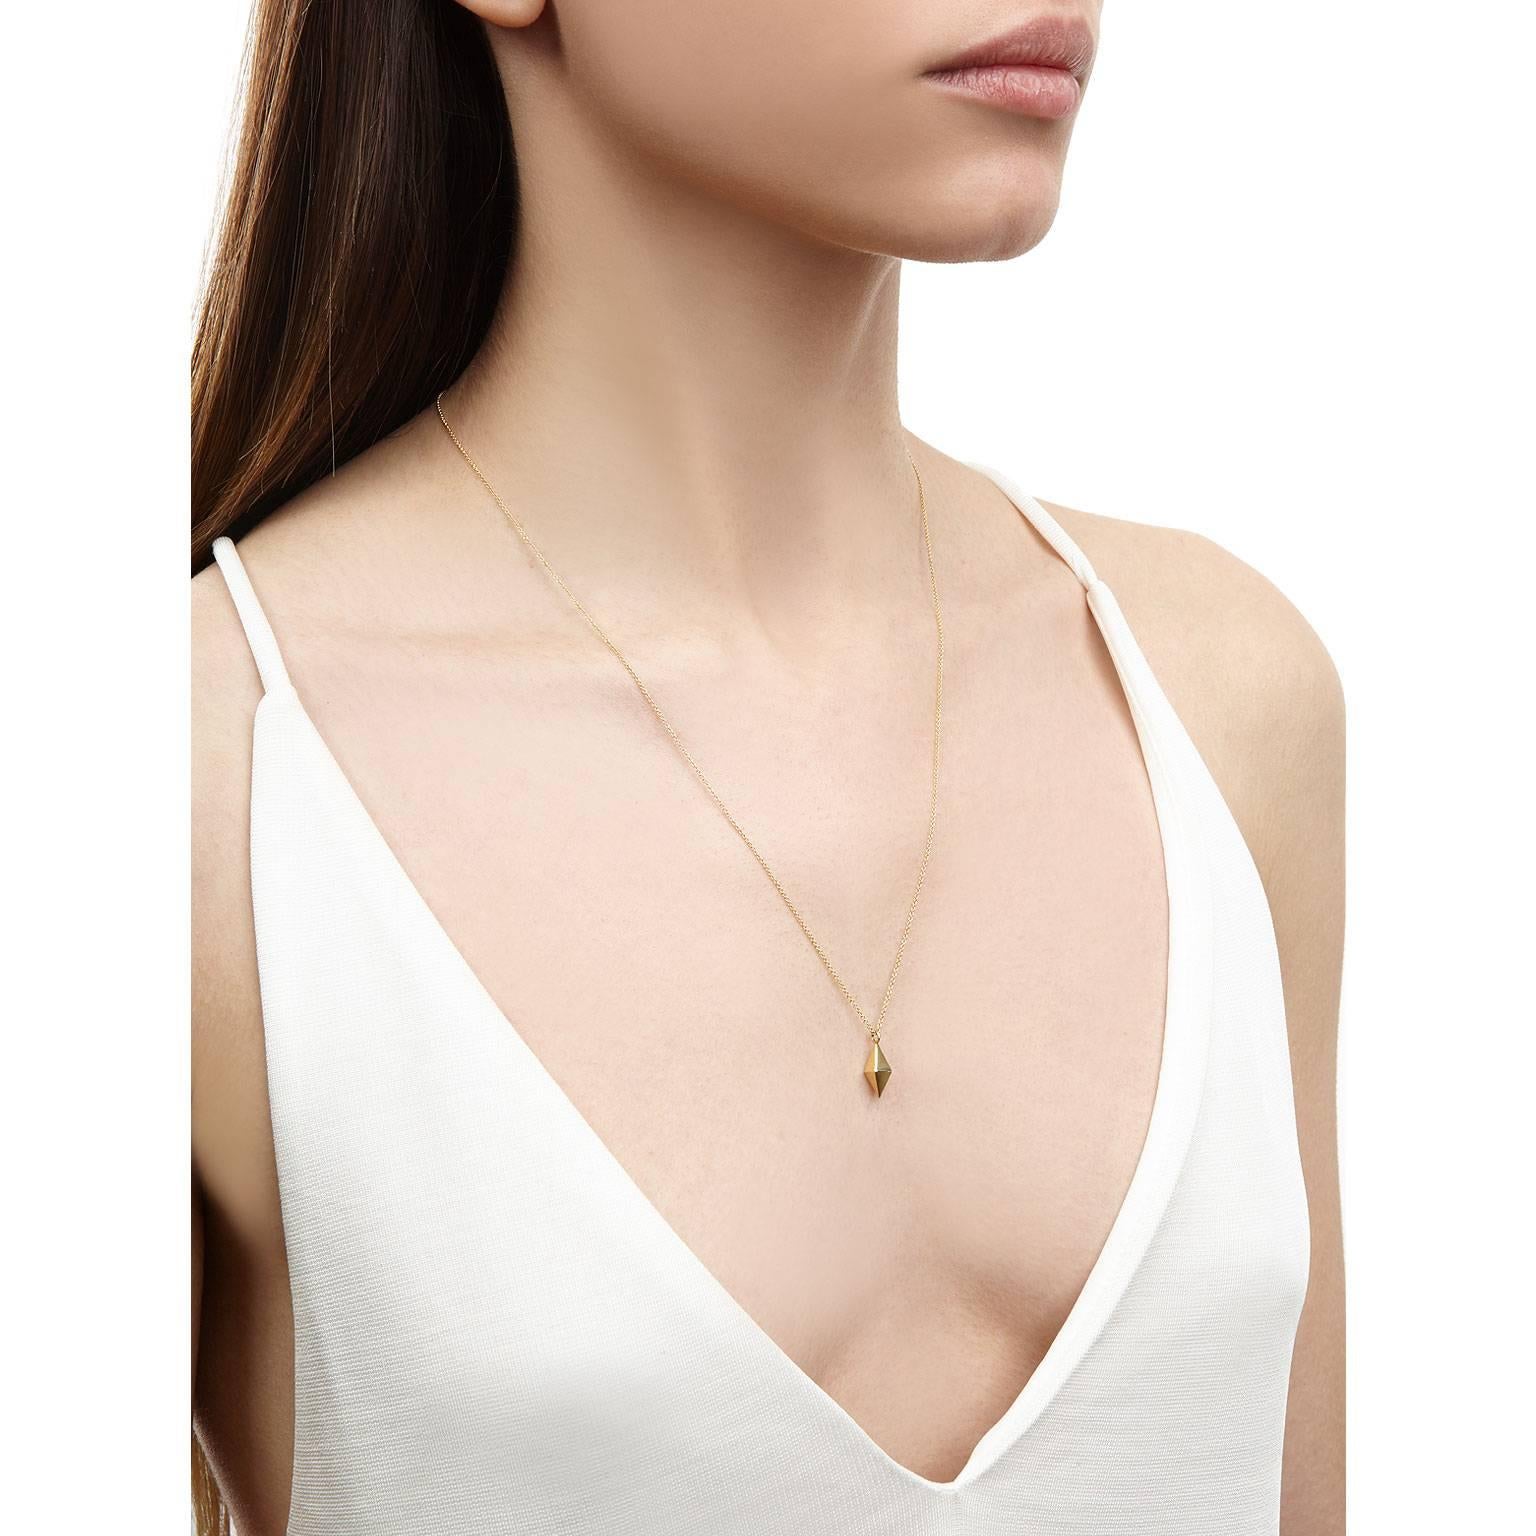 This gold octahedral double pyramid necklace brings a clean and minimal aesthetic to your everyday look. The pendant is suspended on a fine trace chain featuring a shackle catch fastening. 
Wear it alone or layered with other necklaces for a chic